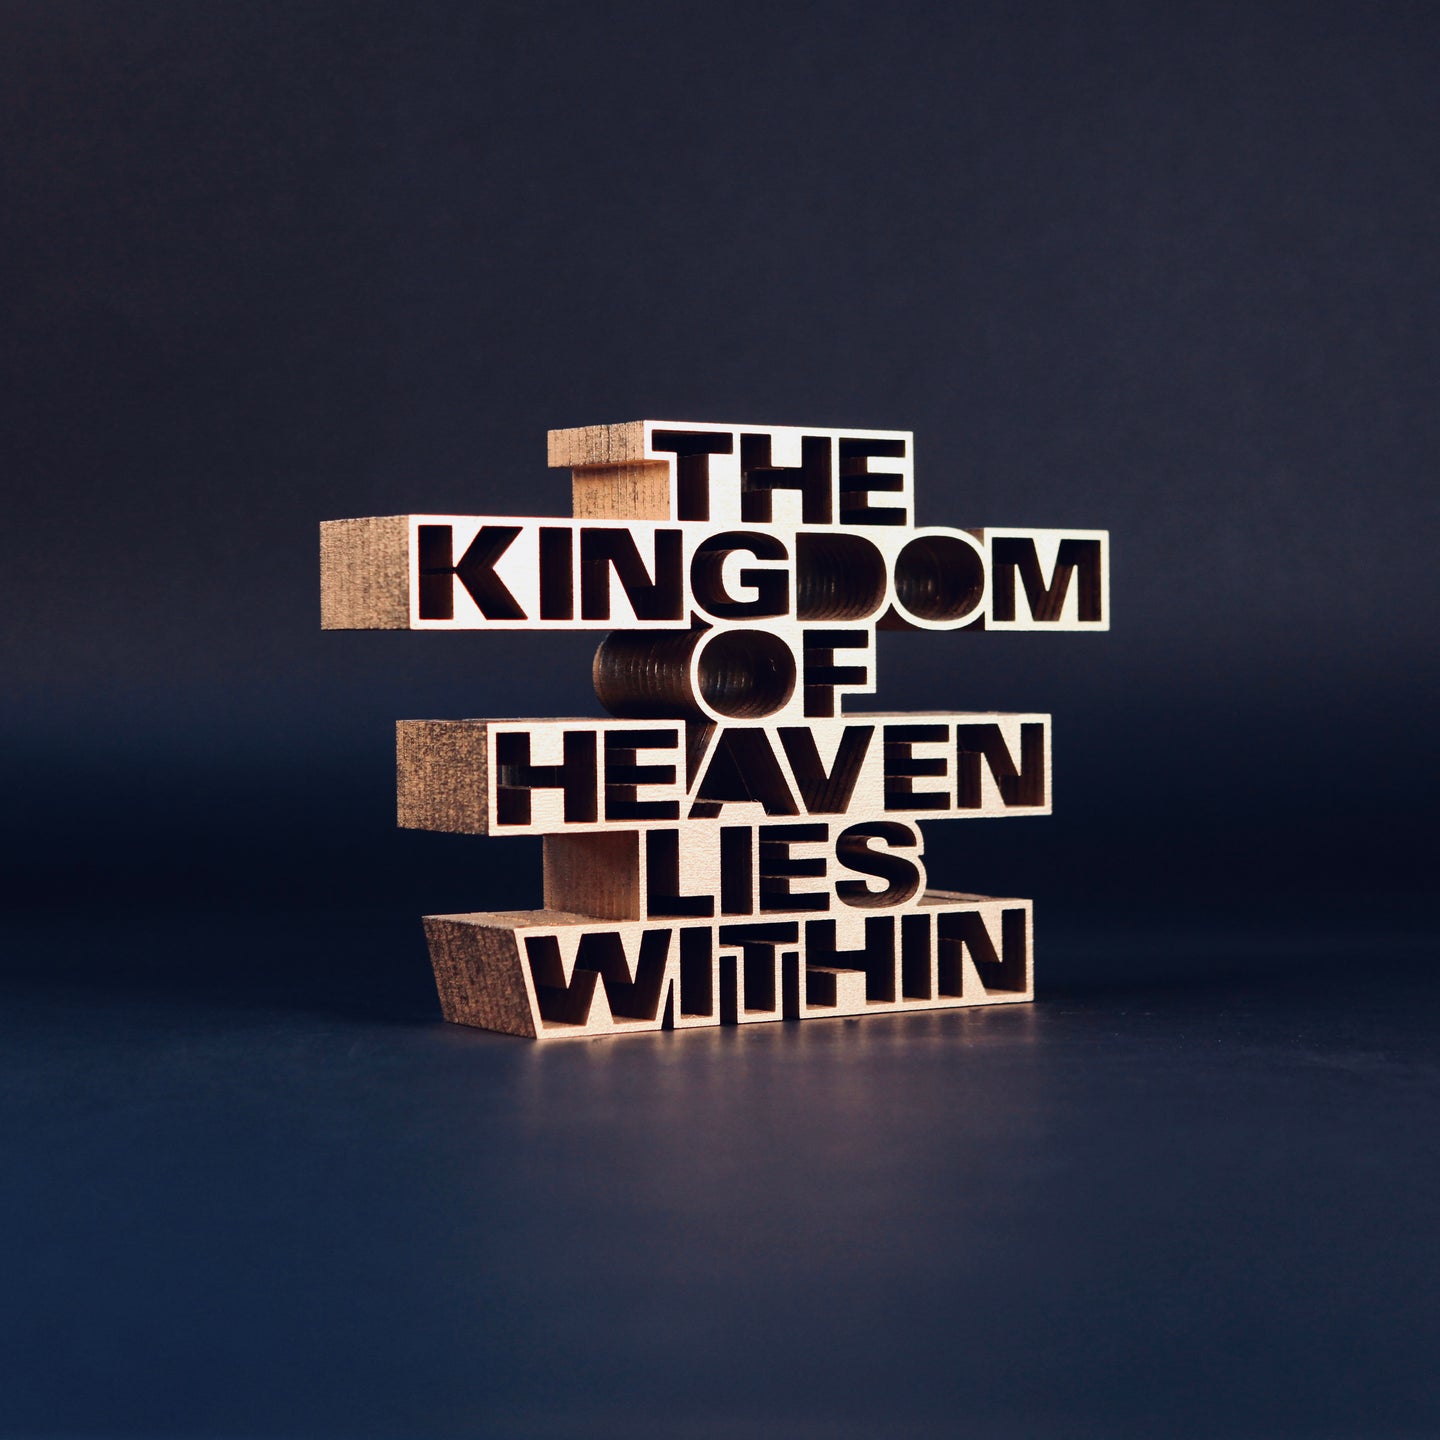 The kingdom of heaven lies within